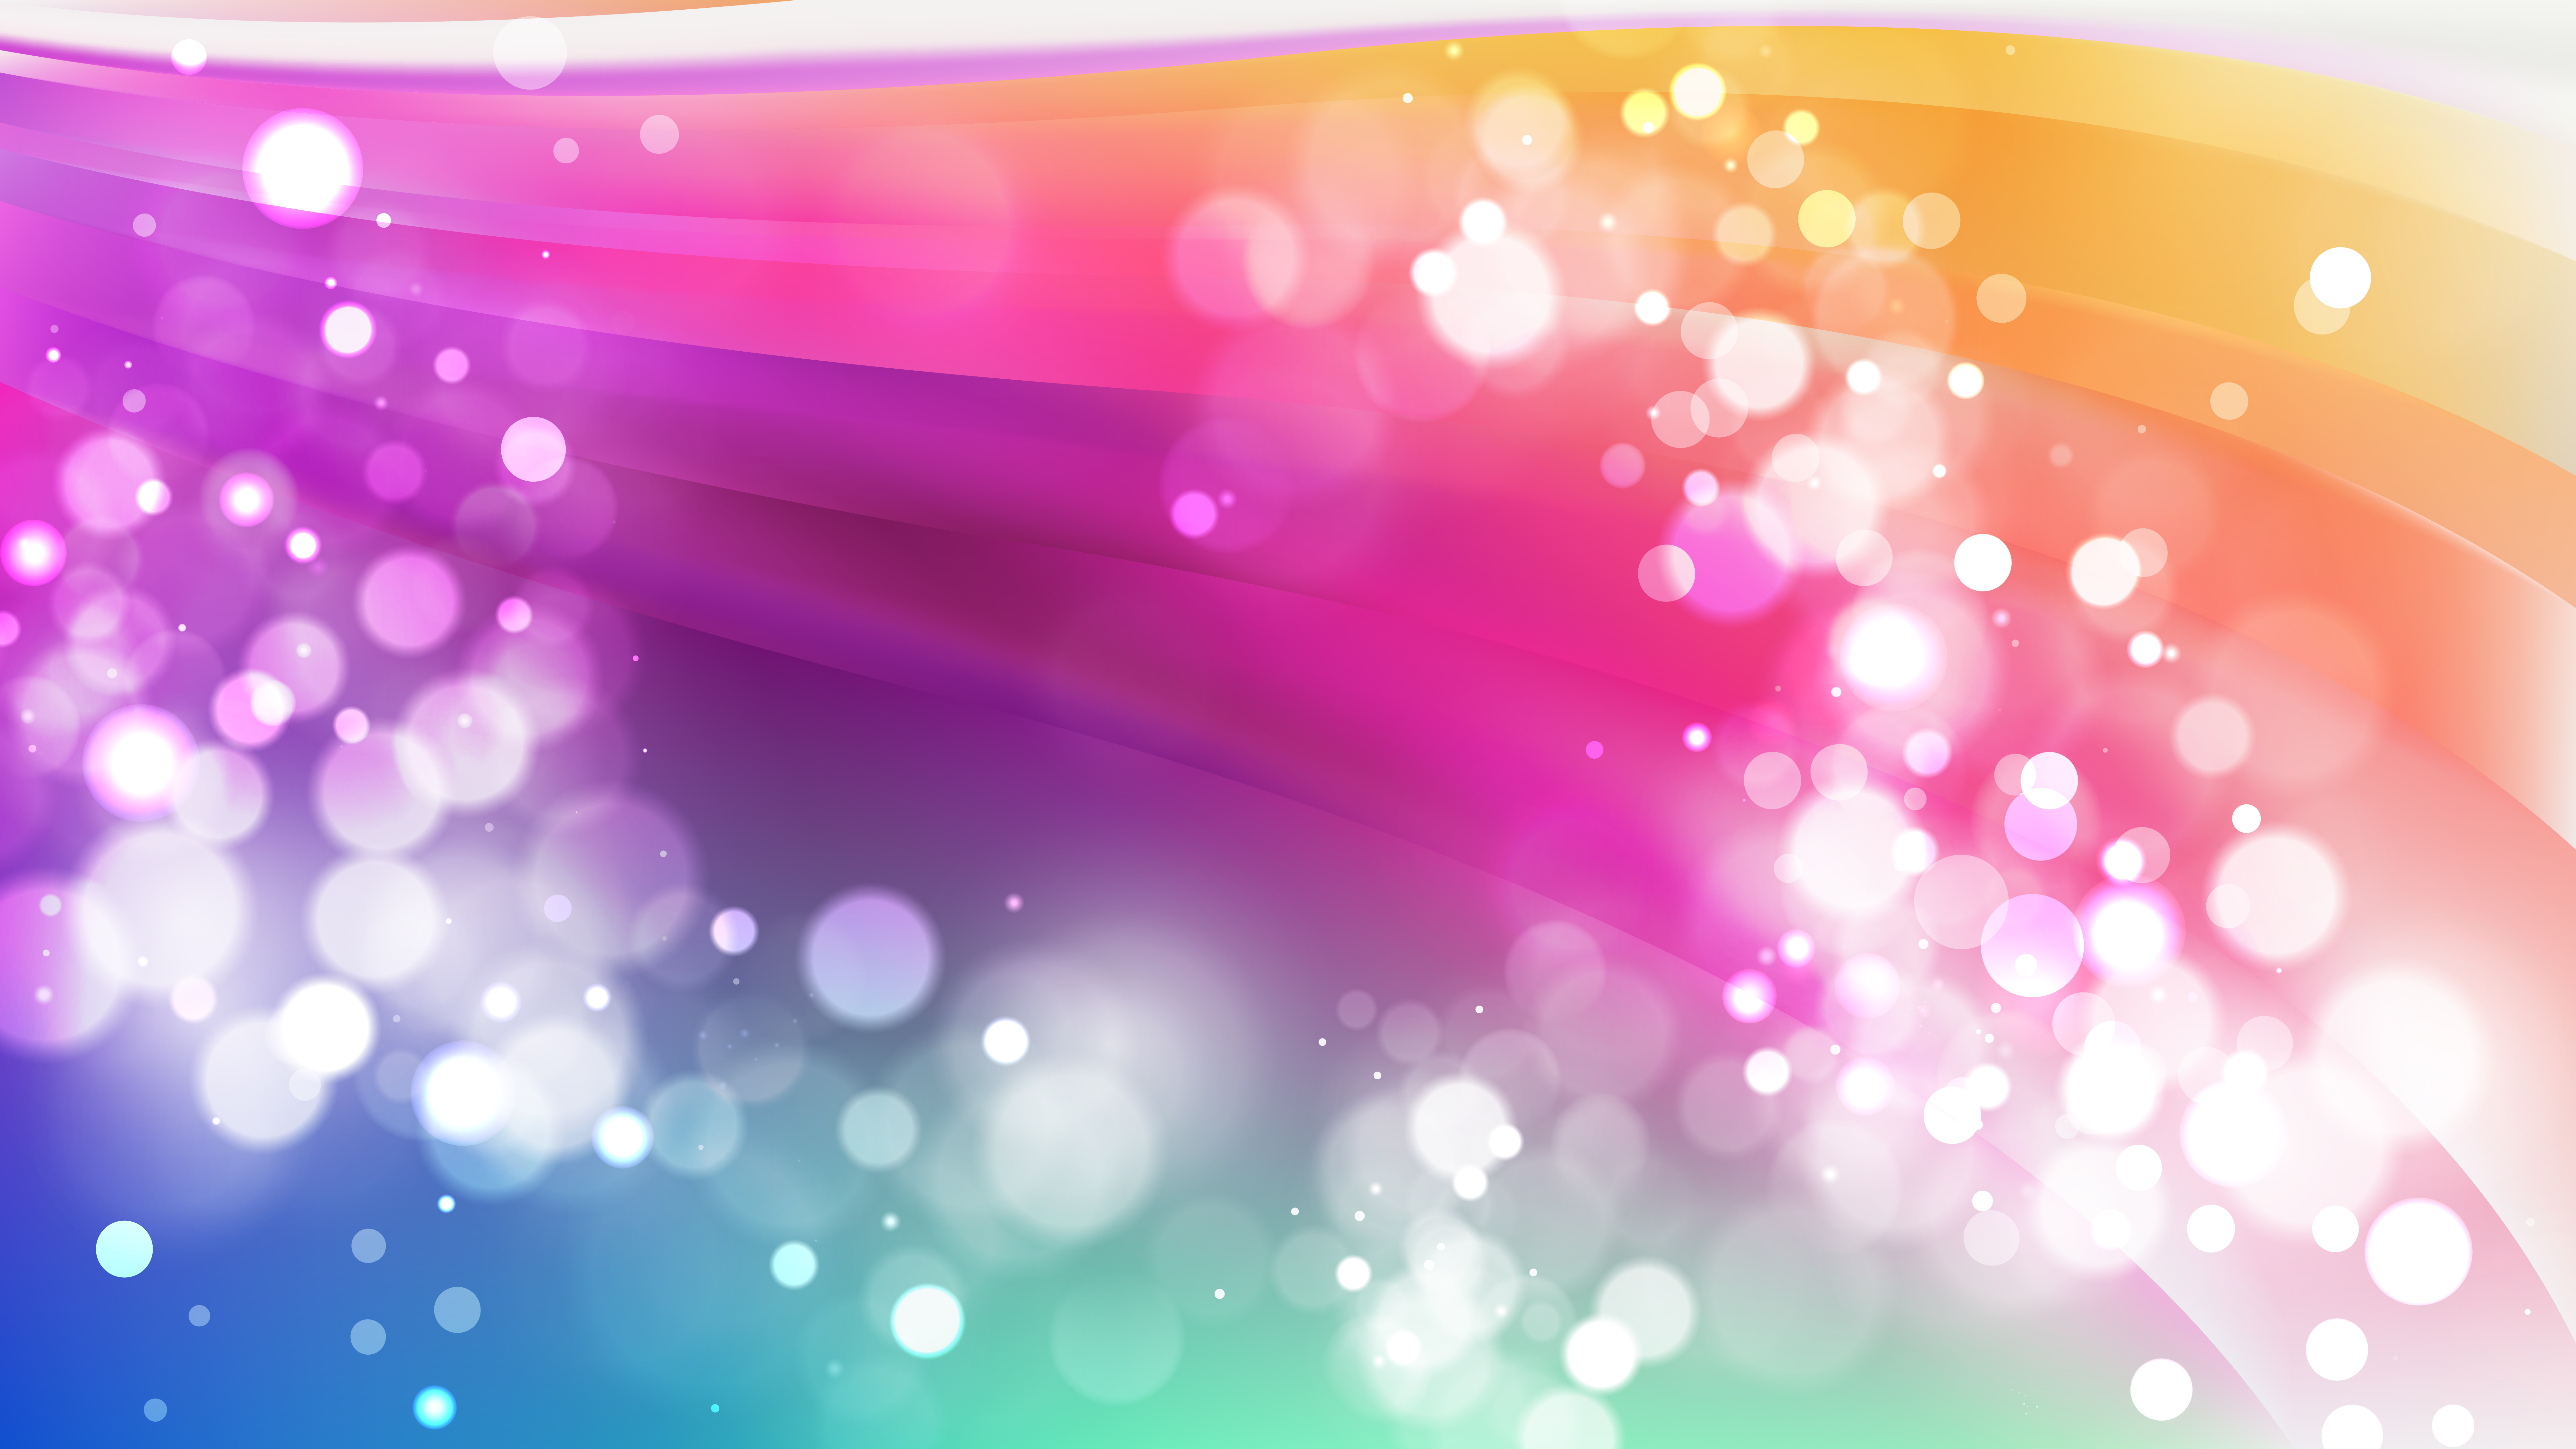 Free Abstract Colorful Defocused Background Design